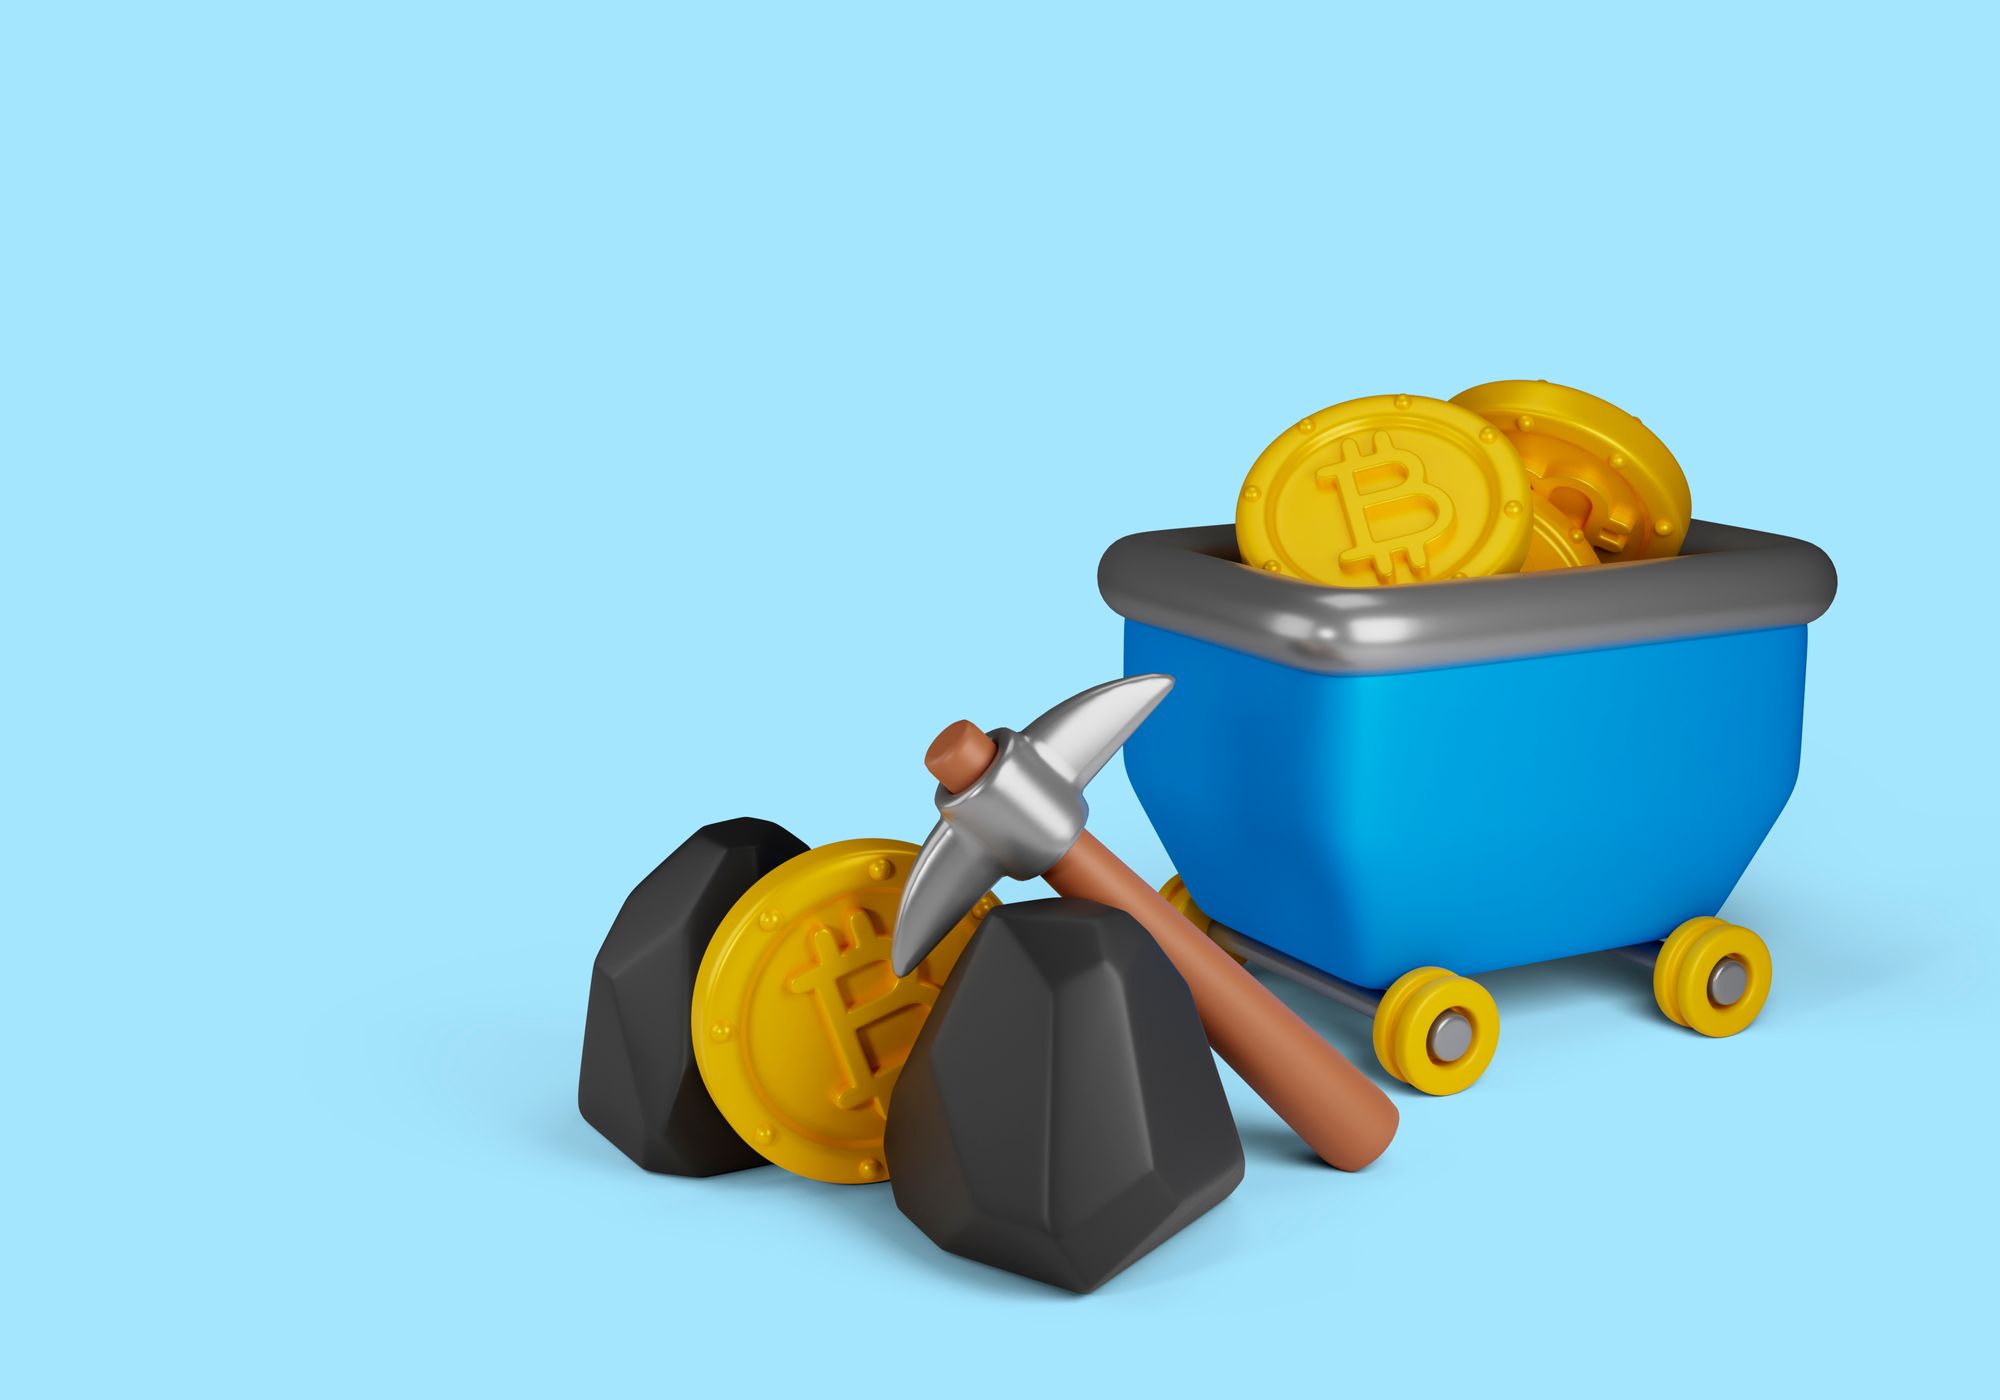 A 3D infographic depicting a rail cart with Bitcoins in it, and a pickaxe in front of it.